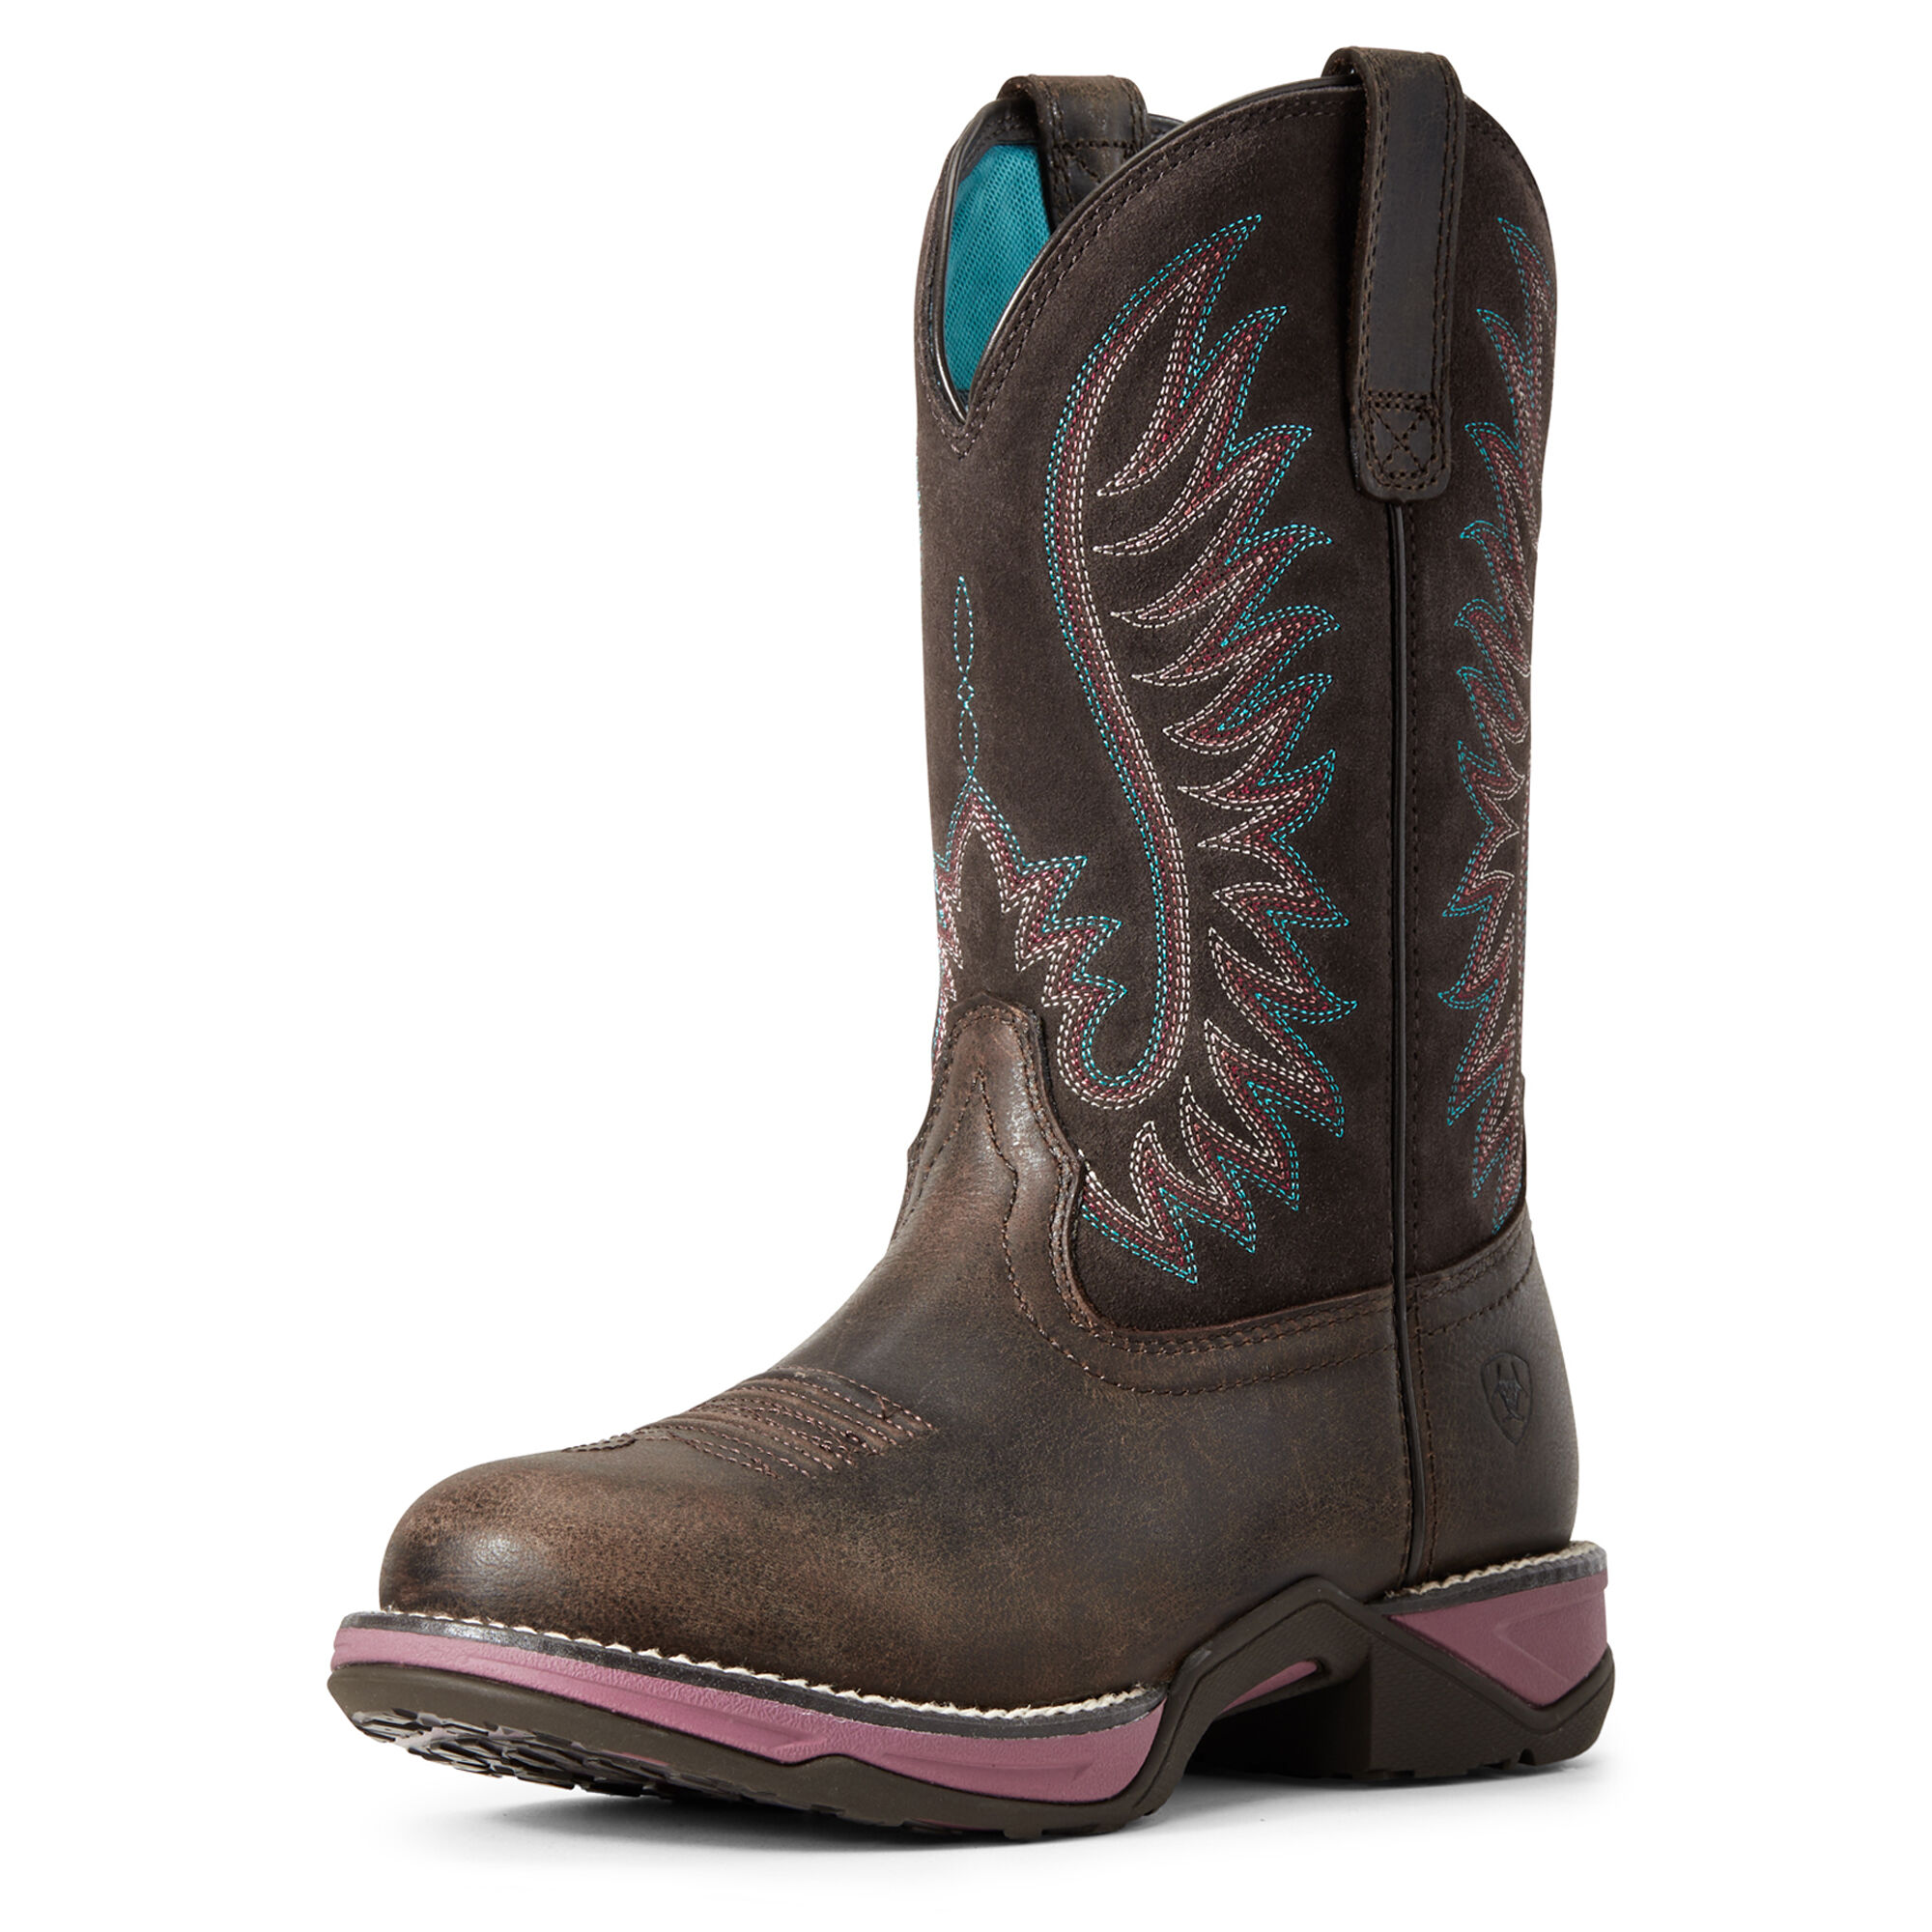 Women's Anthem Round Toe Western Boots in Acorn Leather  by Ariat